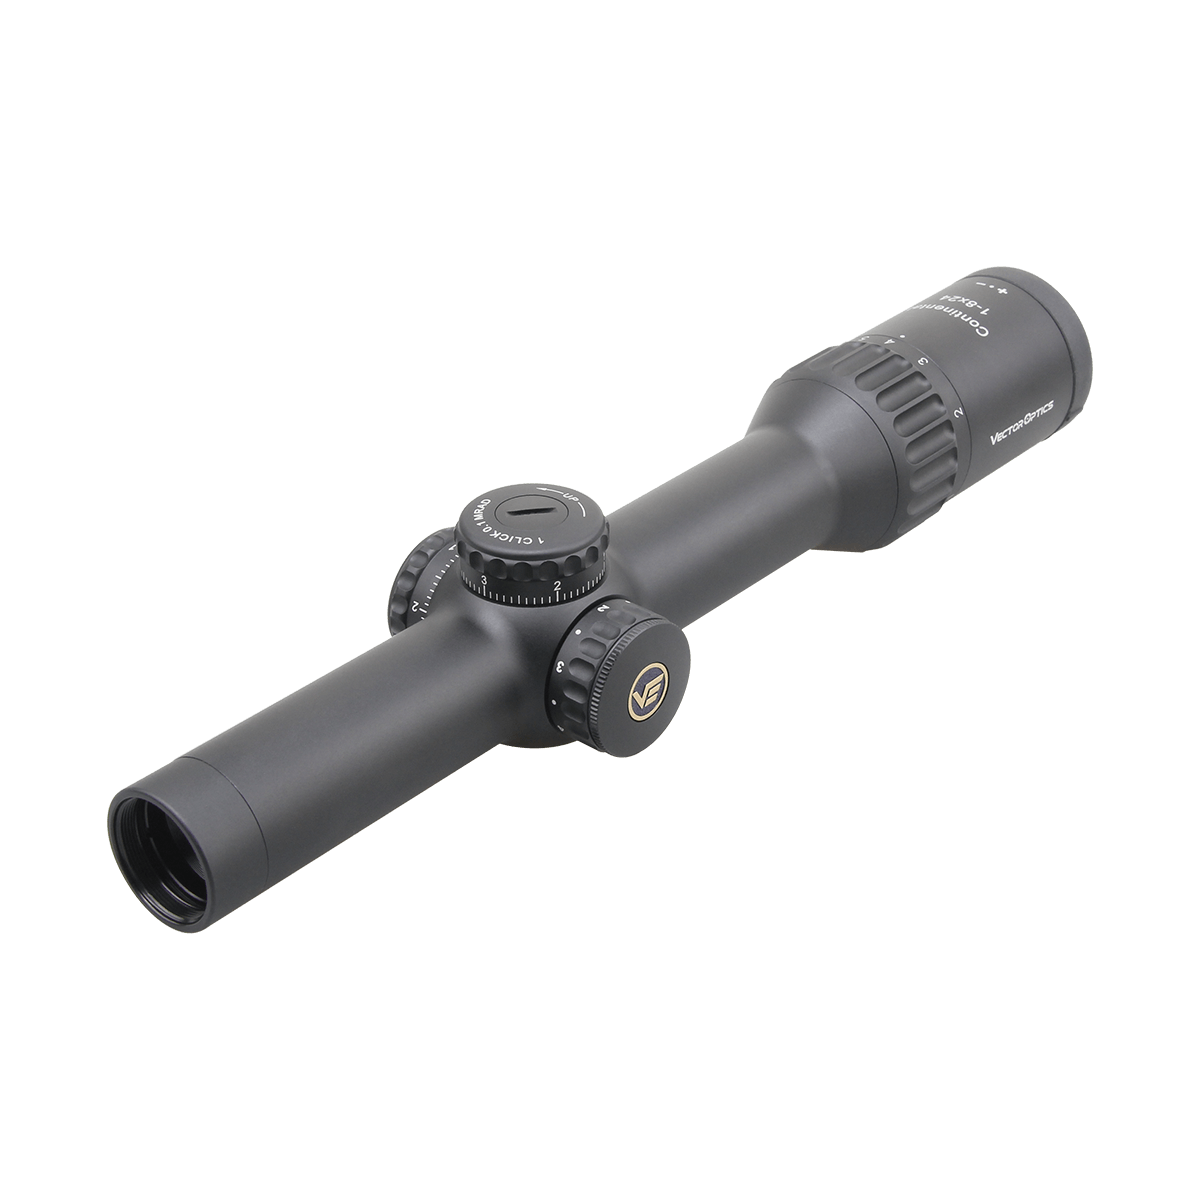 Continental x8 1-8x24 SFP Tactical Scope ED